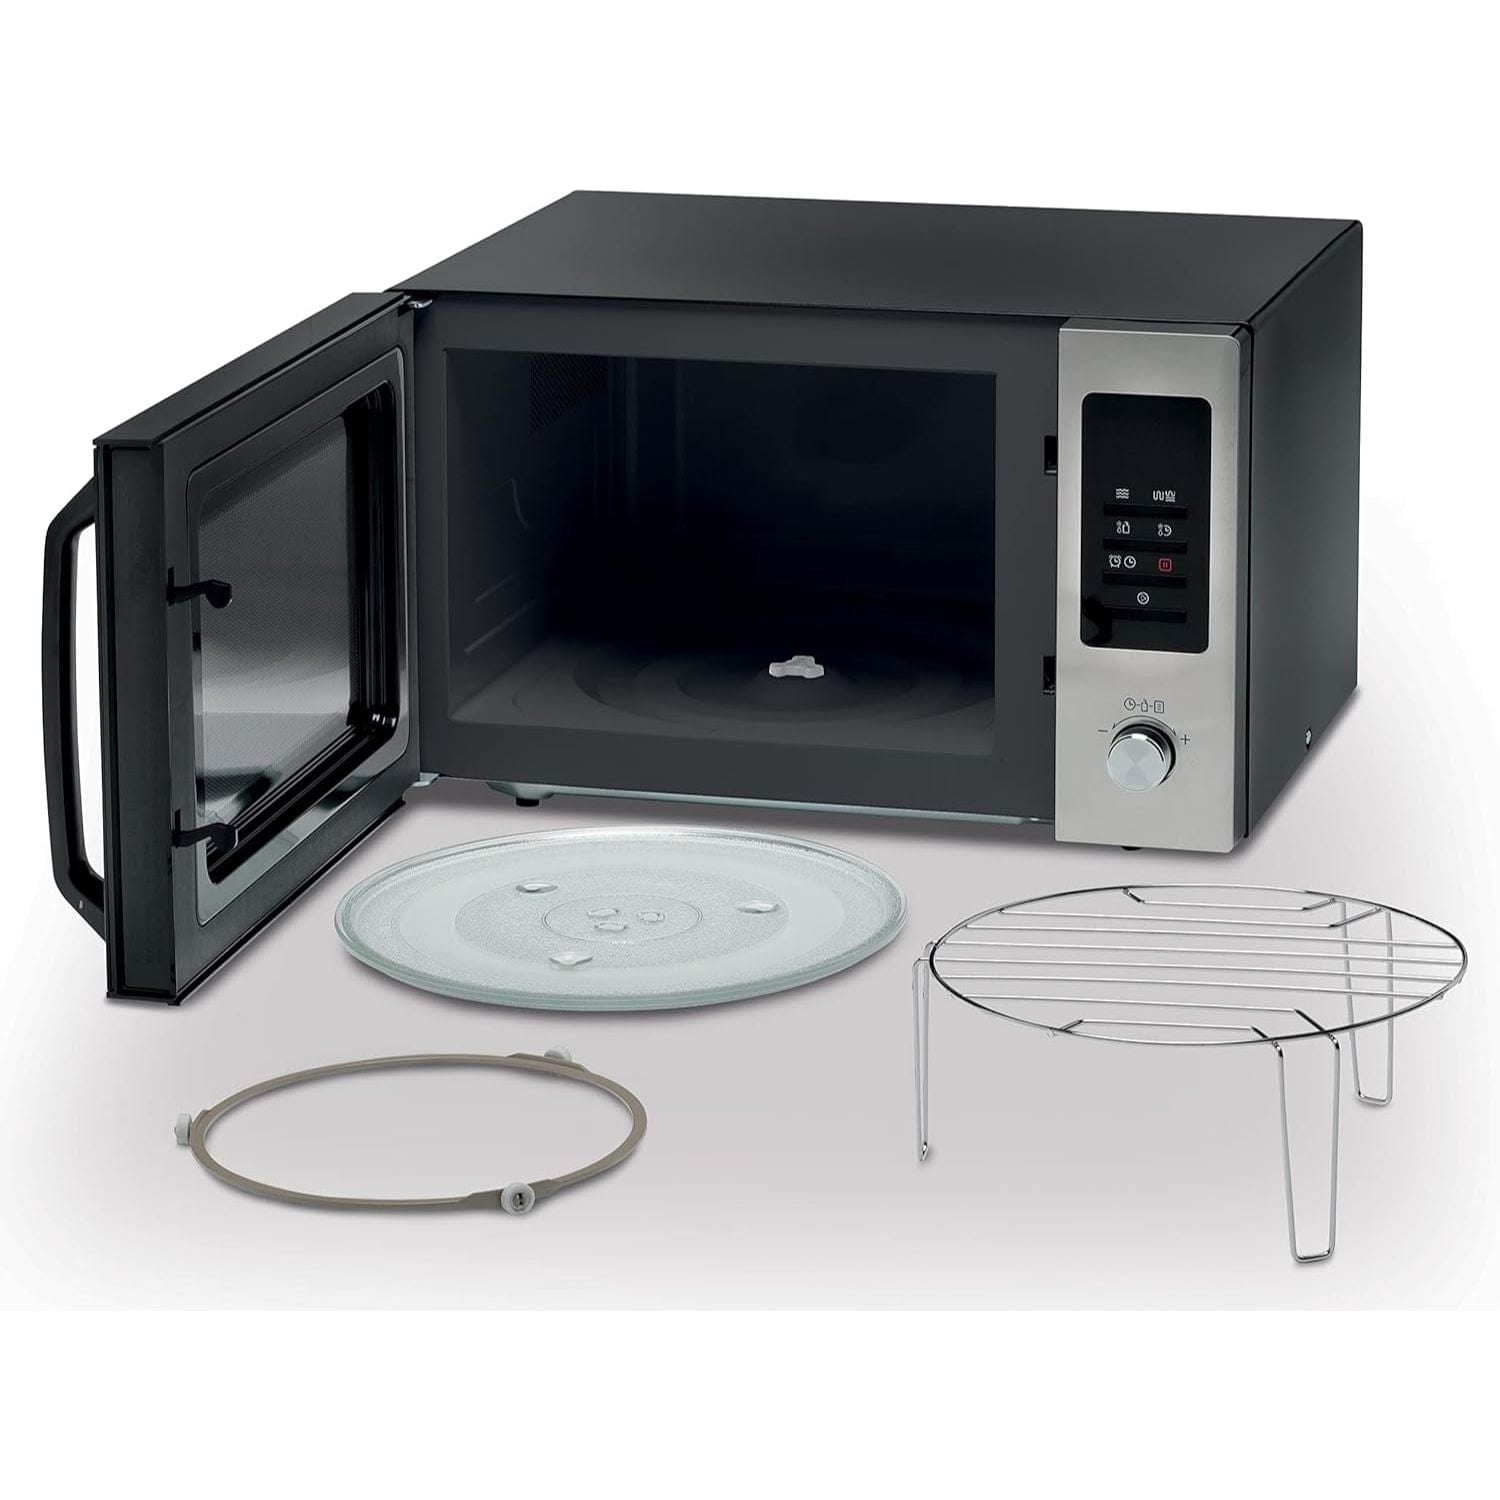 Kenwood Microwave Oven with Grill 30L